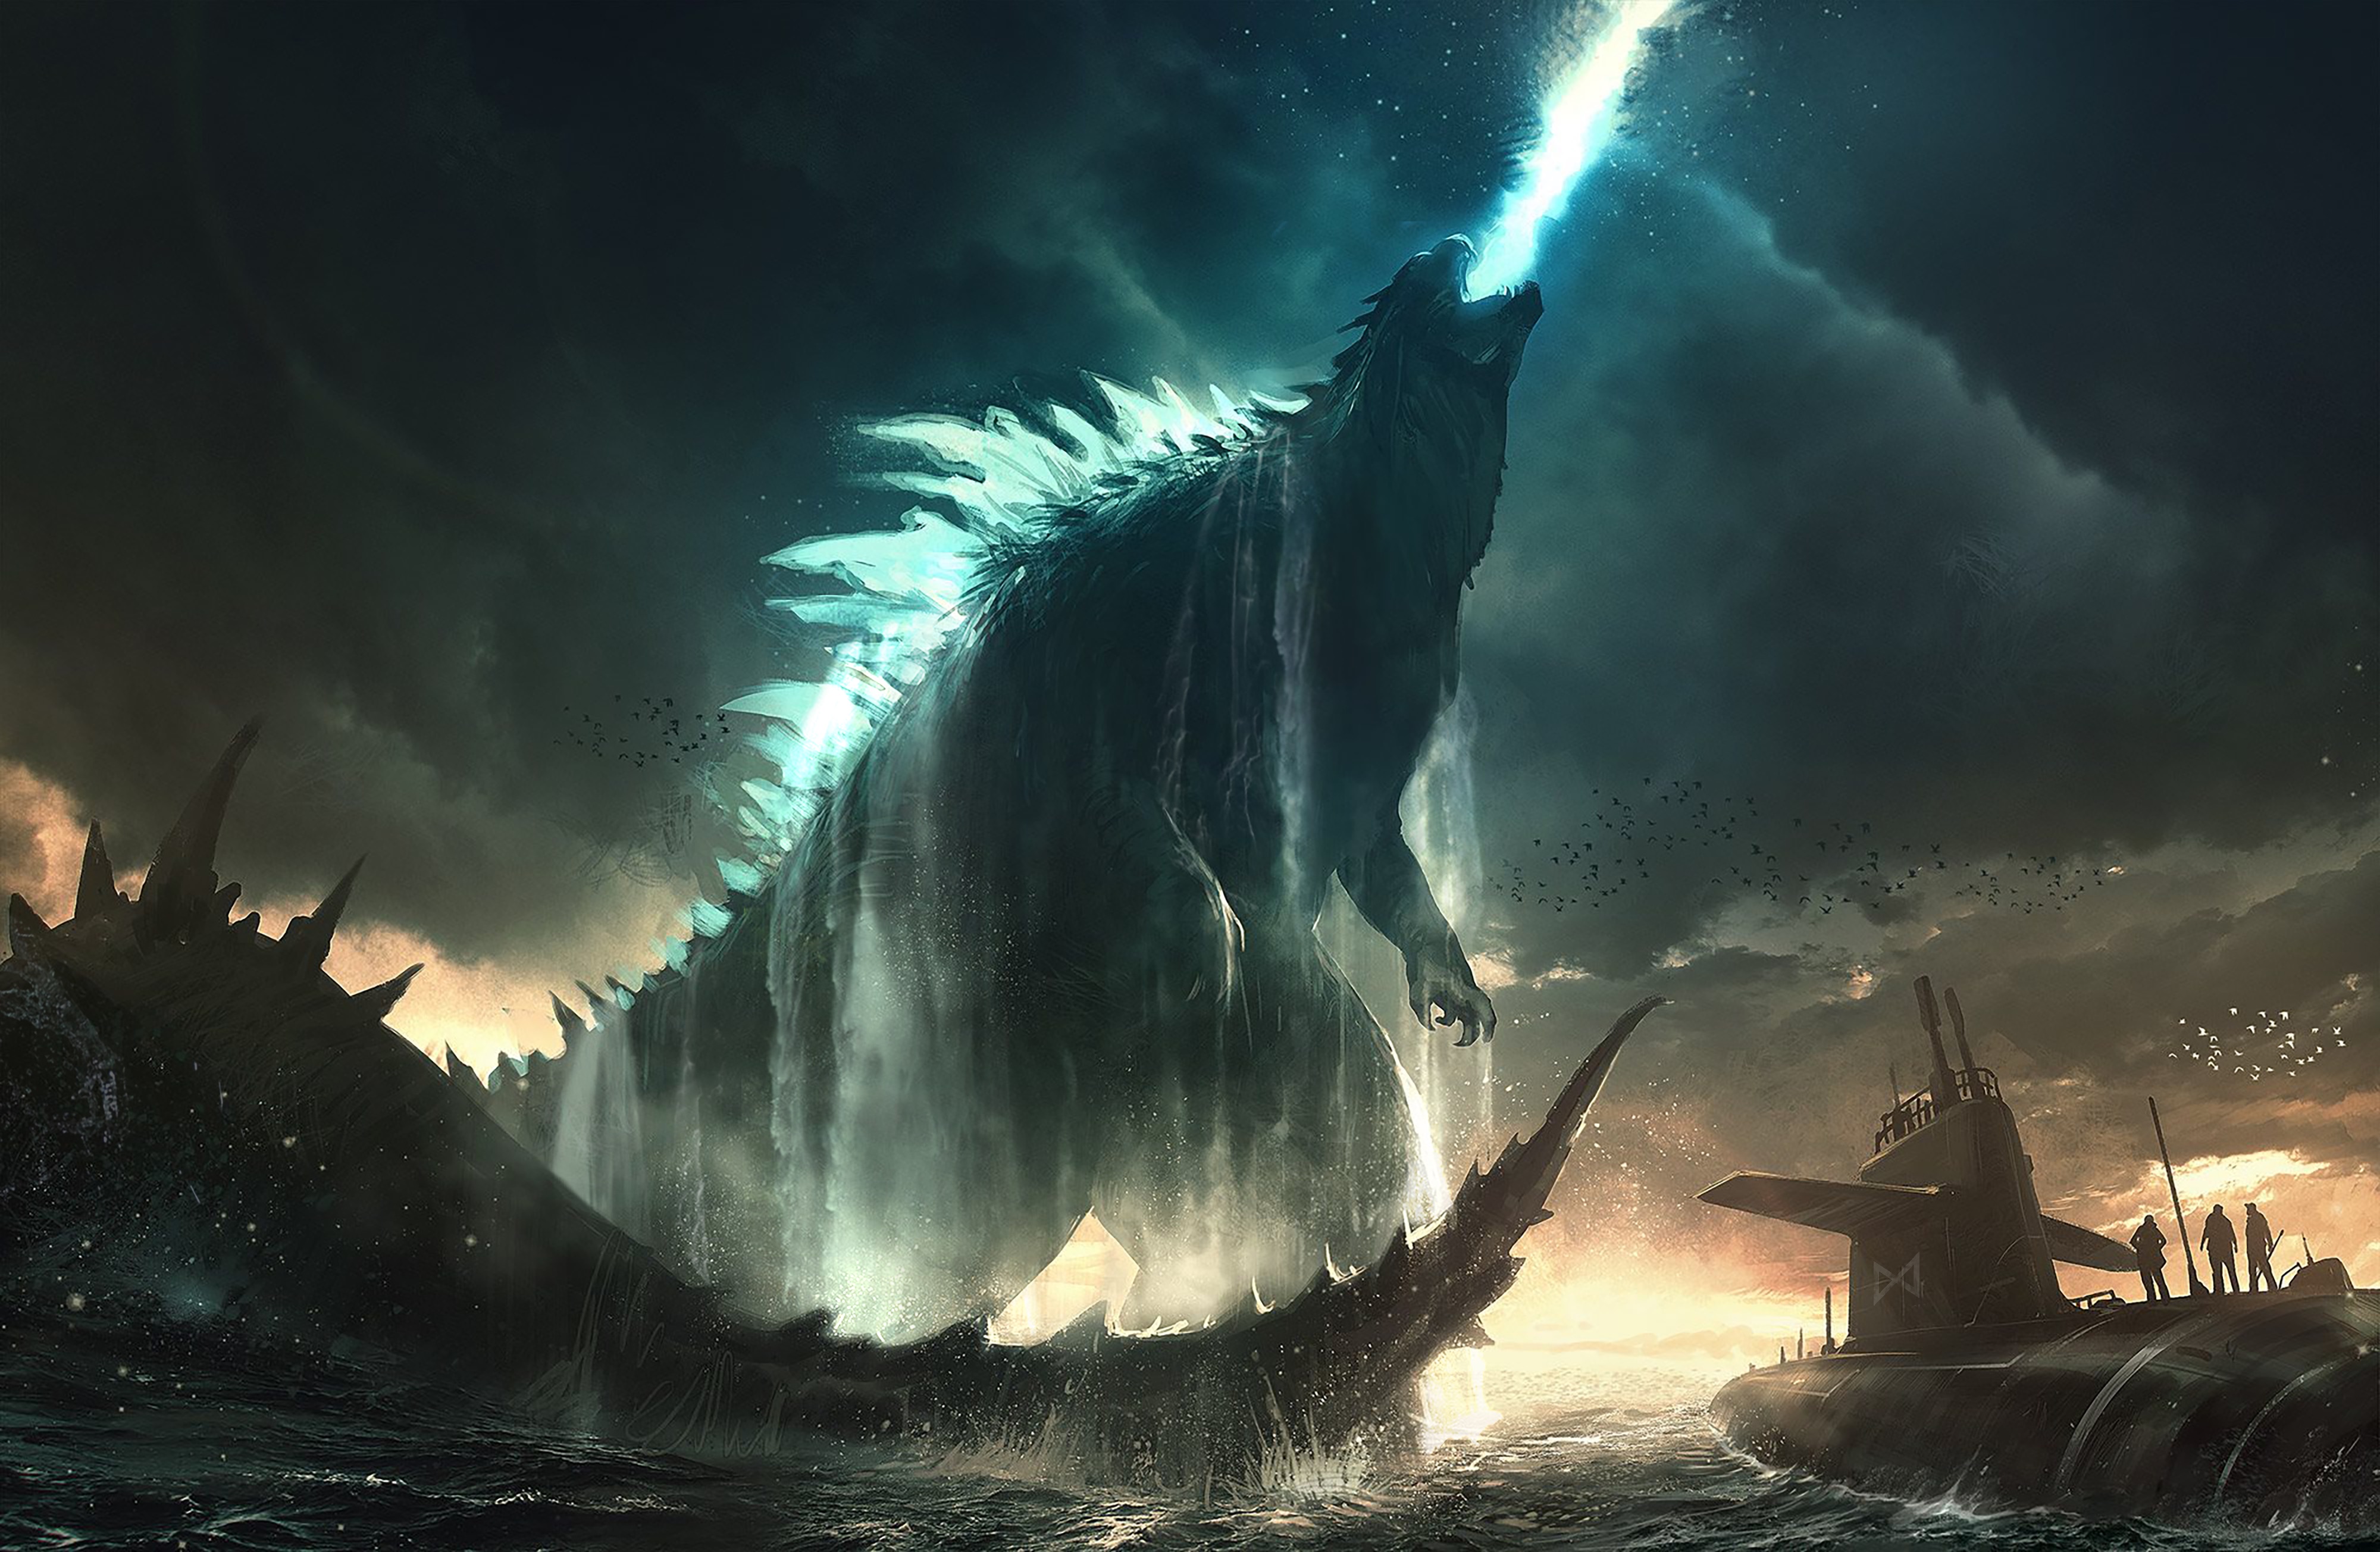 Godzilla: King of the Monsters - Insane Concept Artwork!